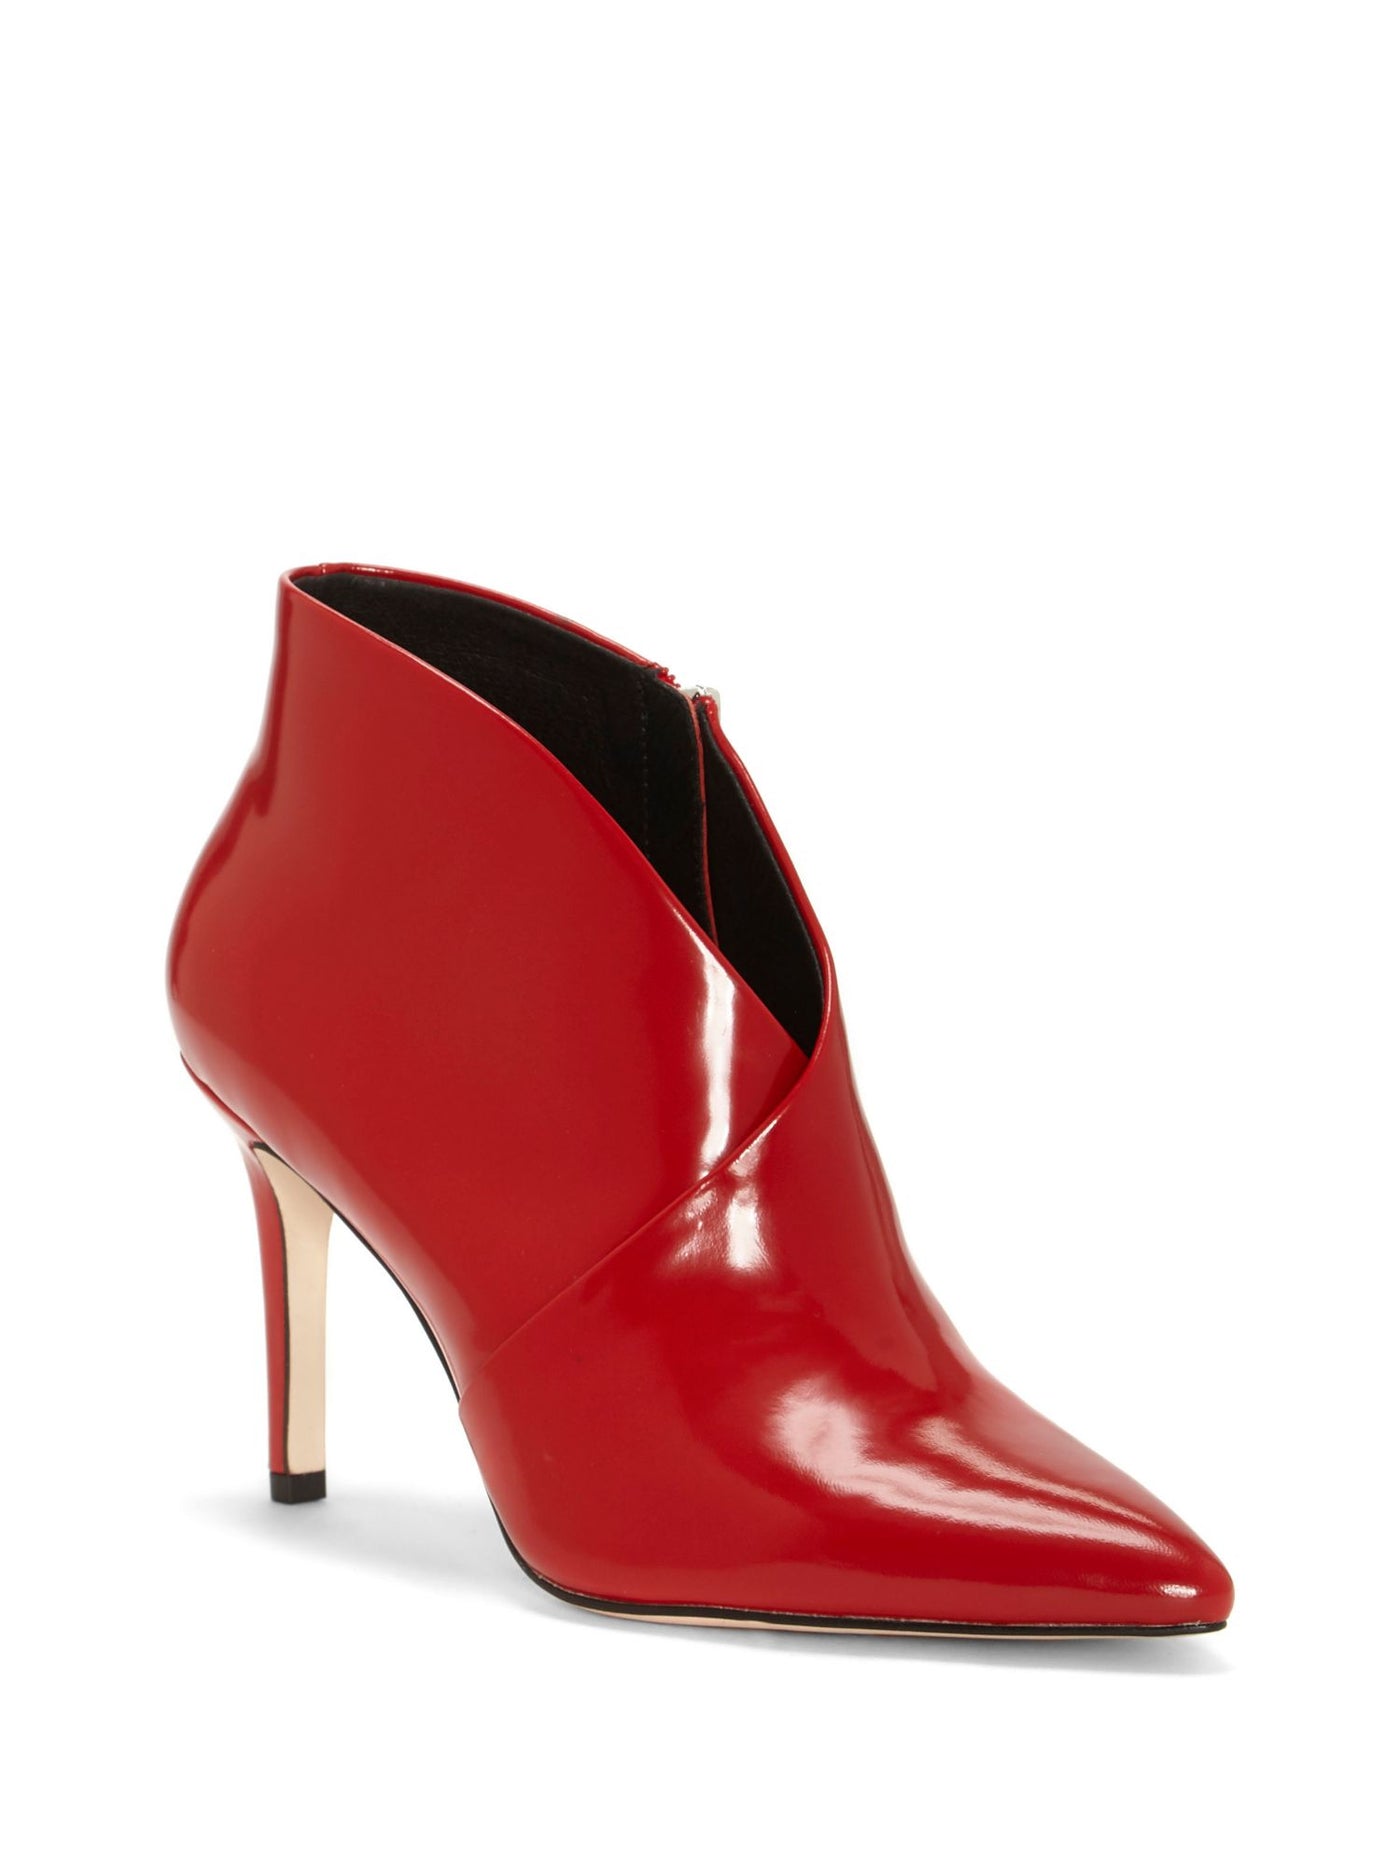 JESSICA SIMPSON Womens Red Plunging V Shaped Upper Cushioned Layra Pointy Toe Stiletto Zip-Up Leather Dress Booties 6 M